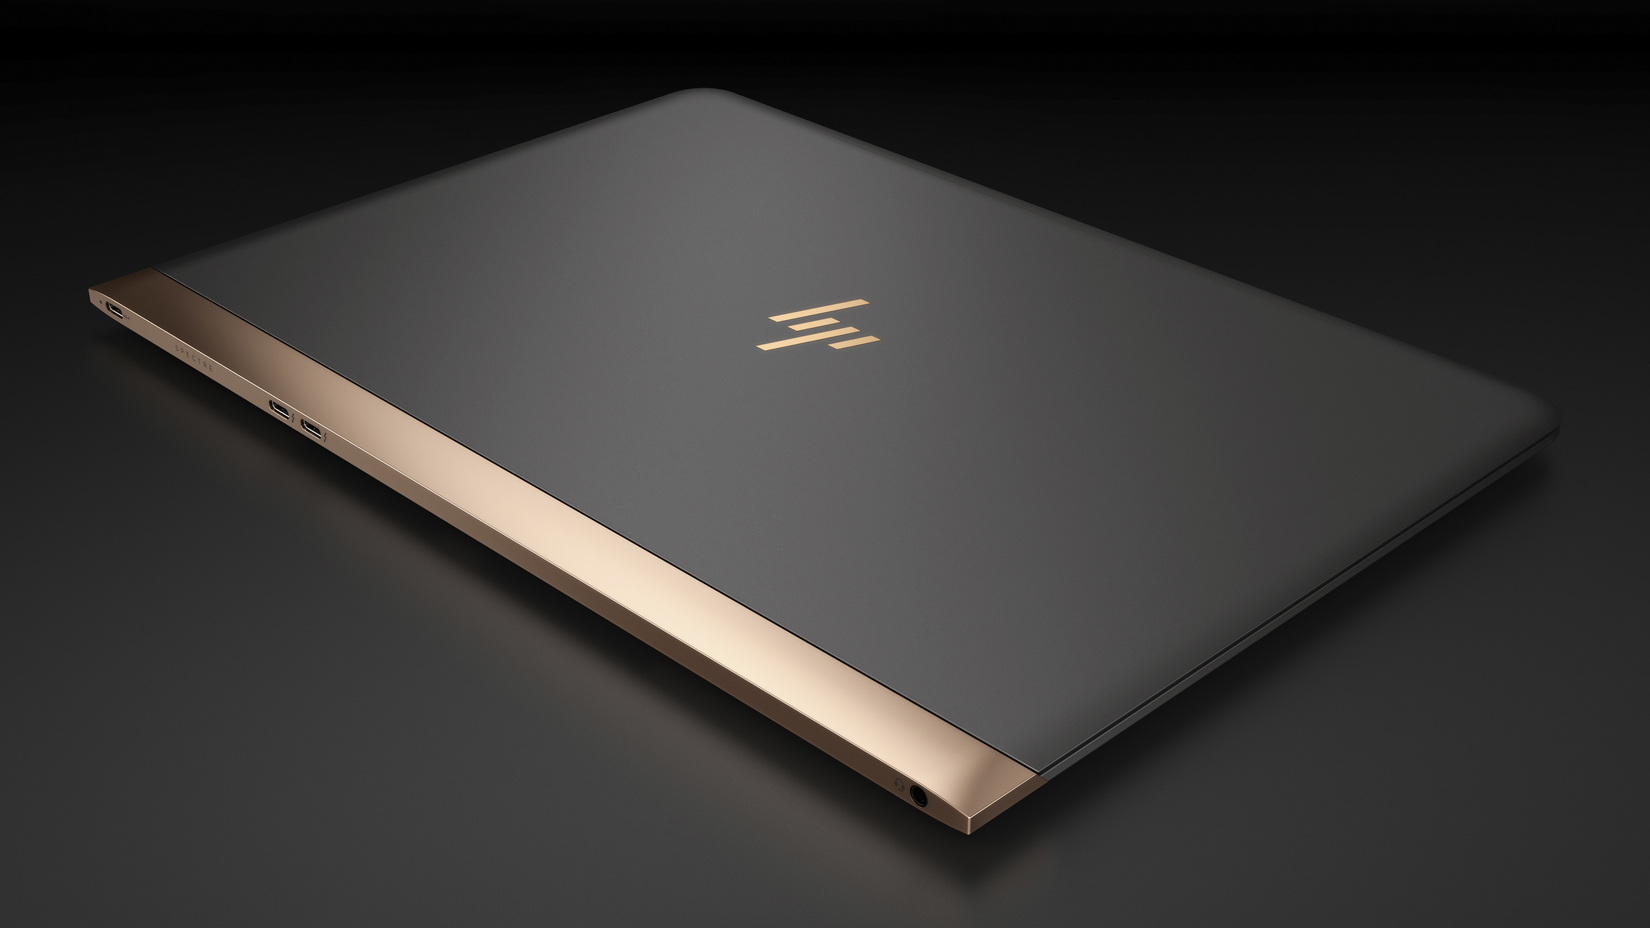 HP Spectre Notebook is world's thinnest laptop